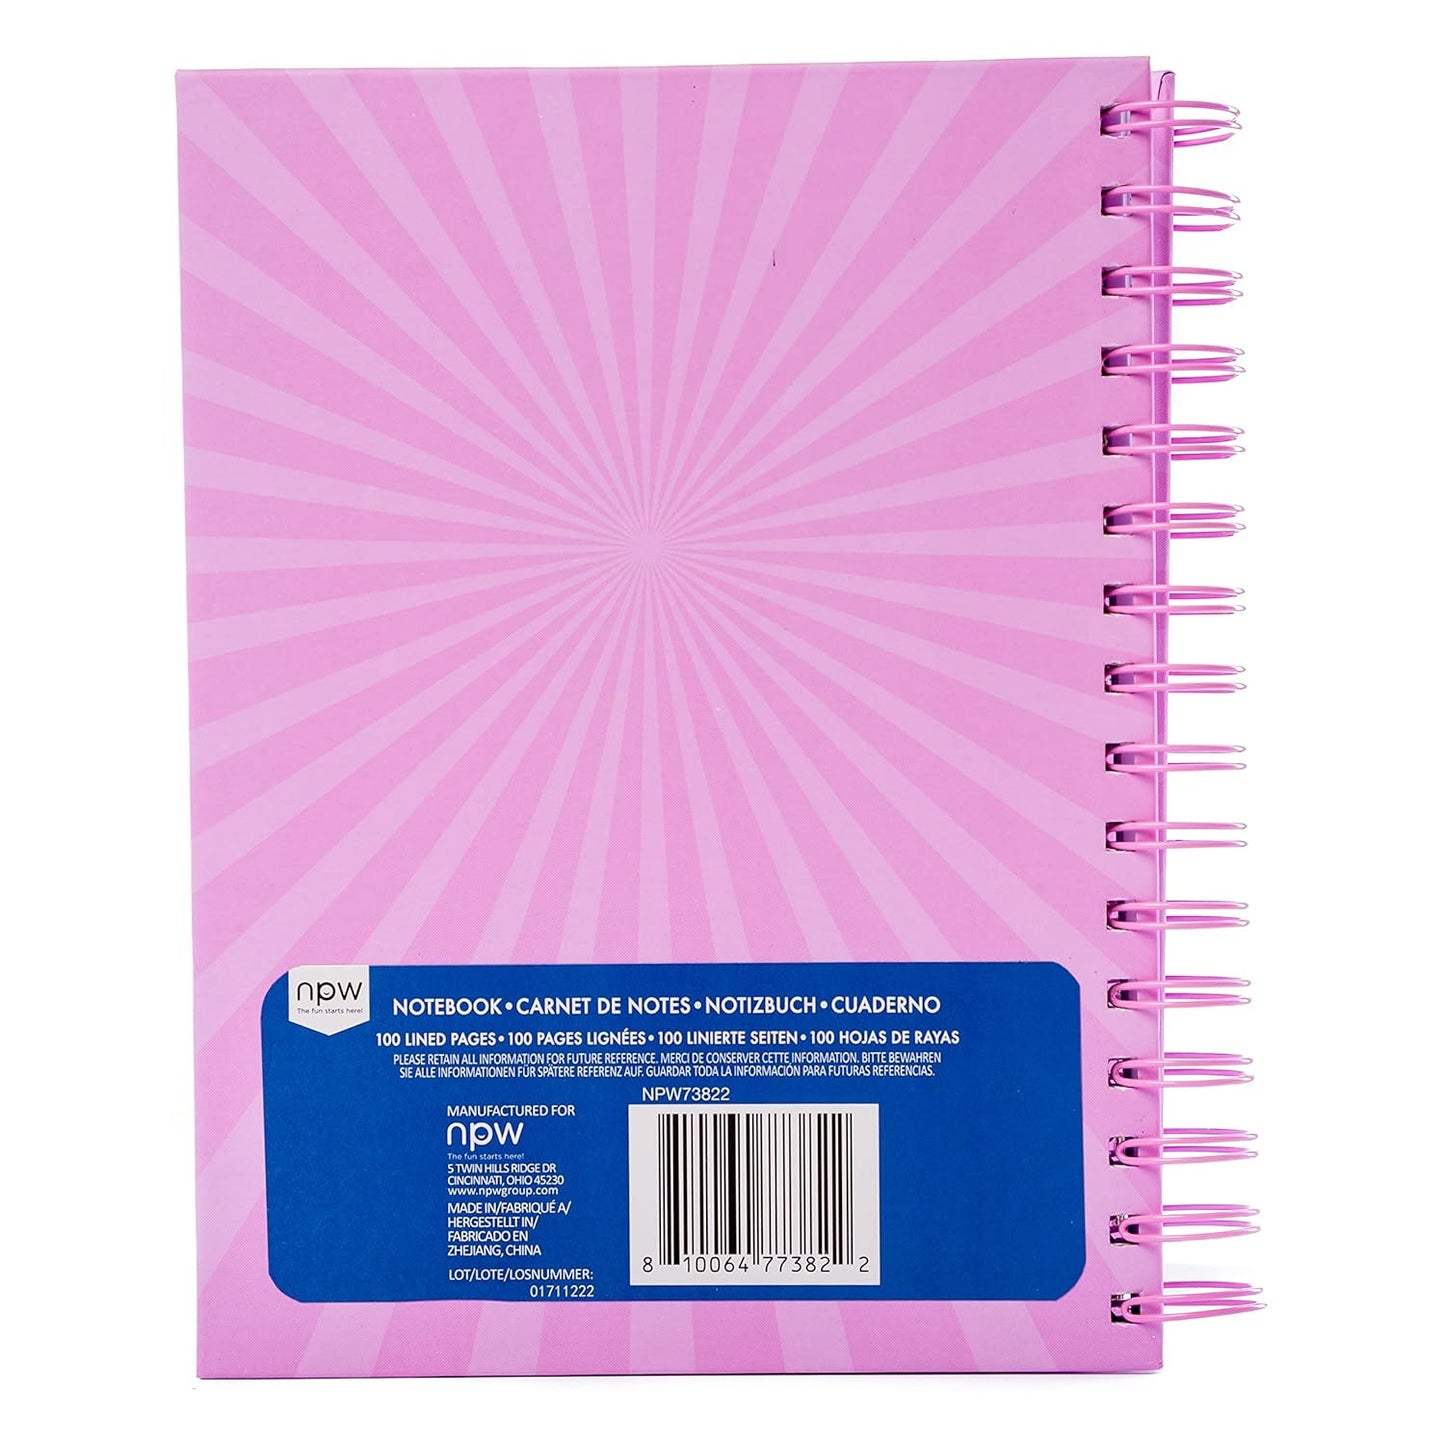 Per My Last Email Spiral Notebook | Groovy Hard Cover Journal